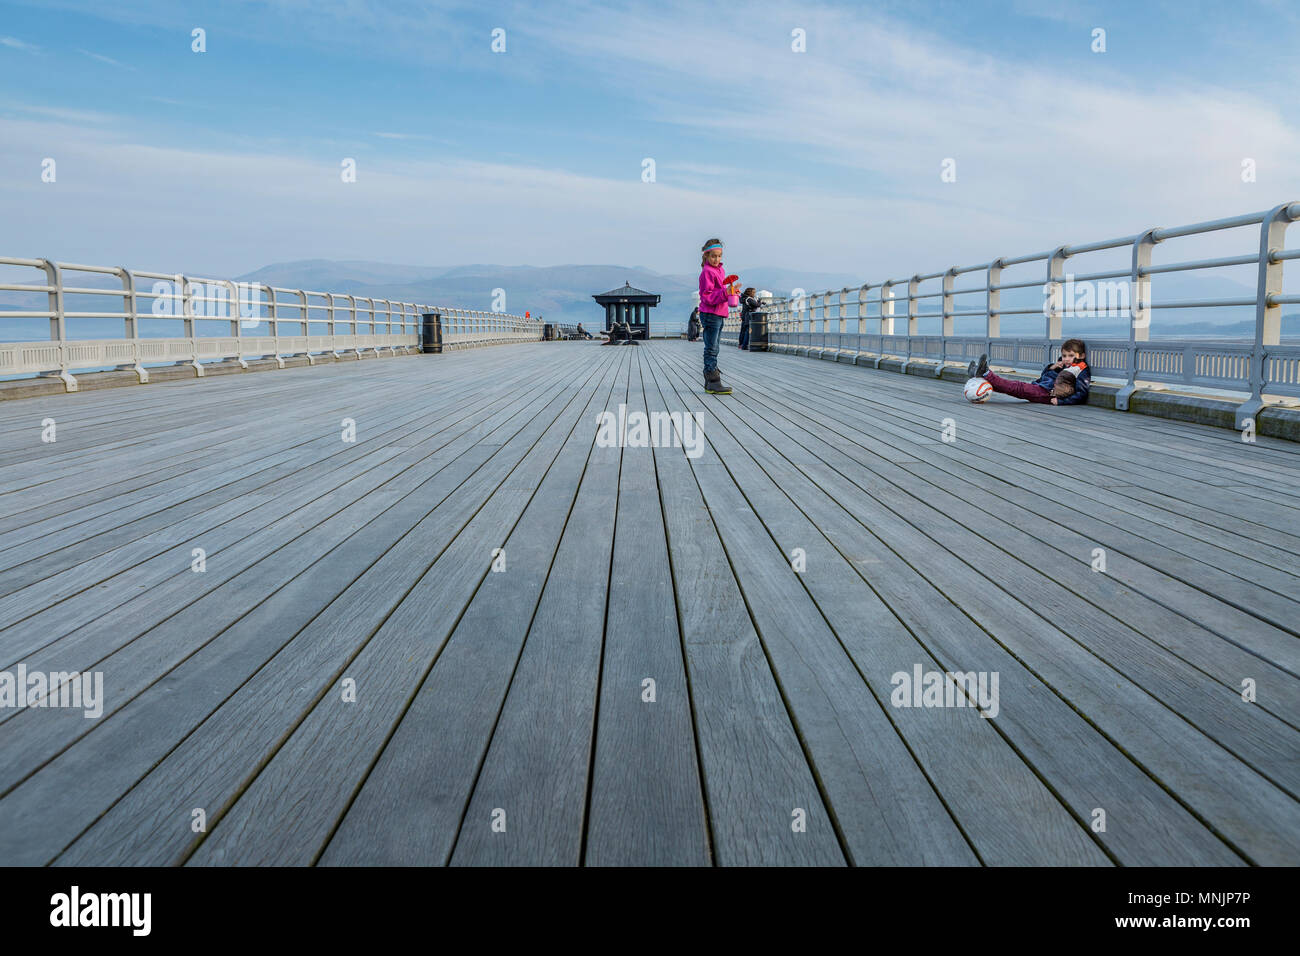 Tourists enjoying a sunny spring evening on a wooden pier with views of Snowdonia mountains, Beaumaris Pier, Anglesey, North Wales, UK Stock Photo